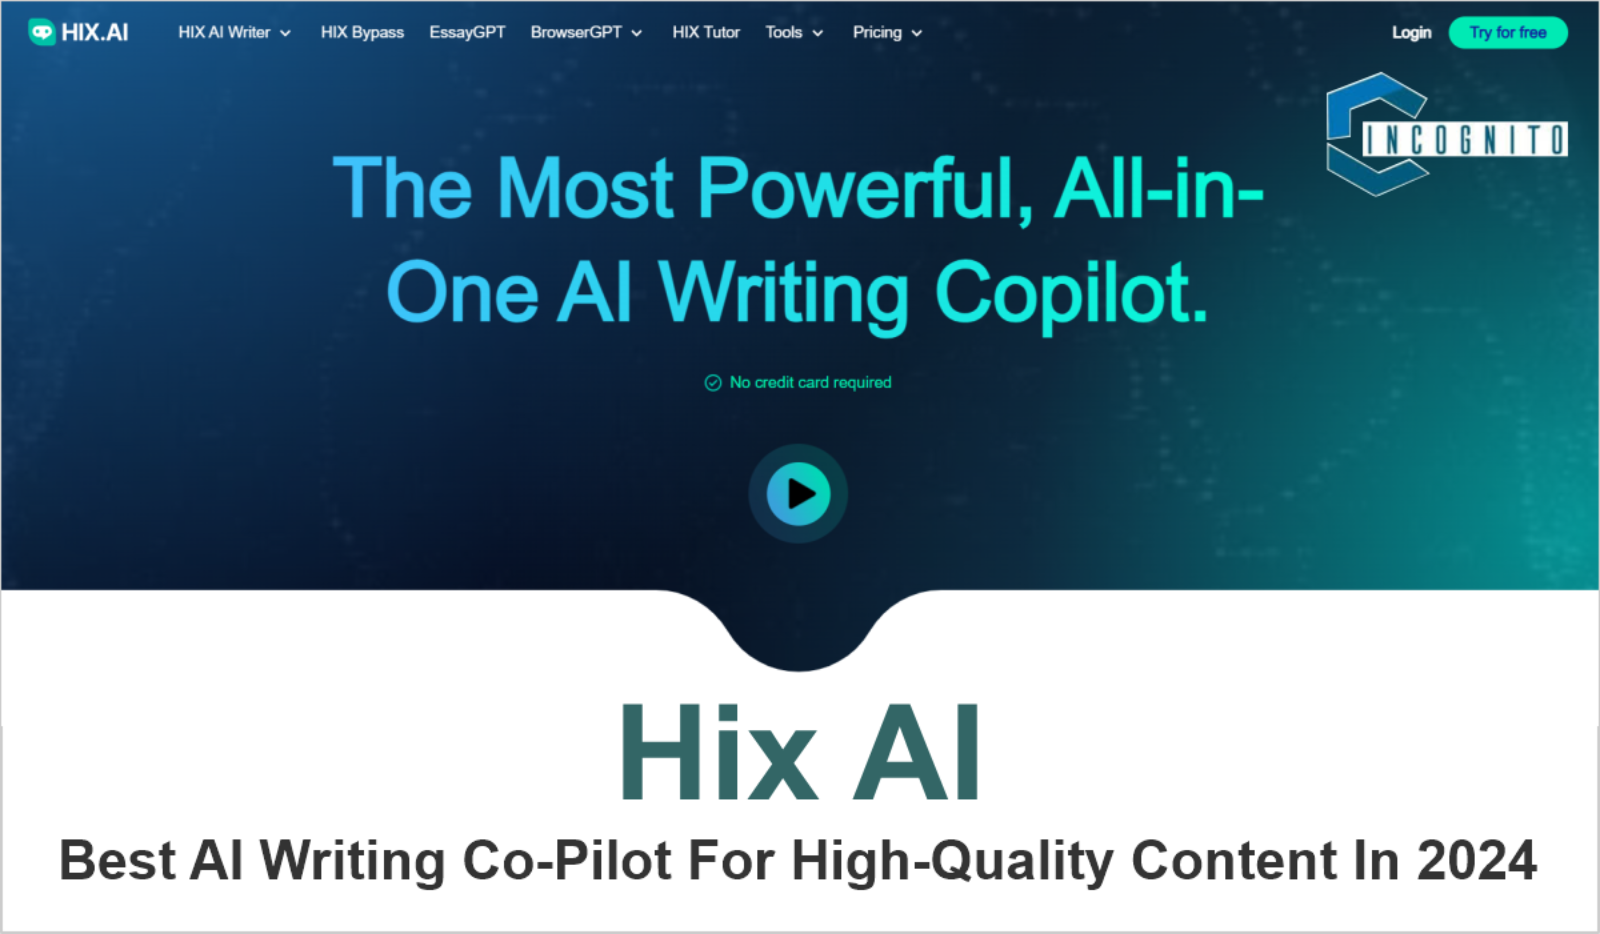 Hix AI: Best AI Writing Co-Pilot For High-Quality Content In 2024